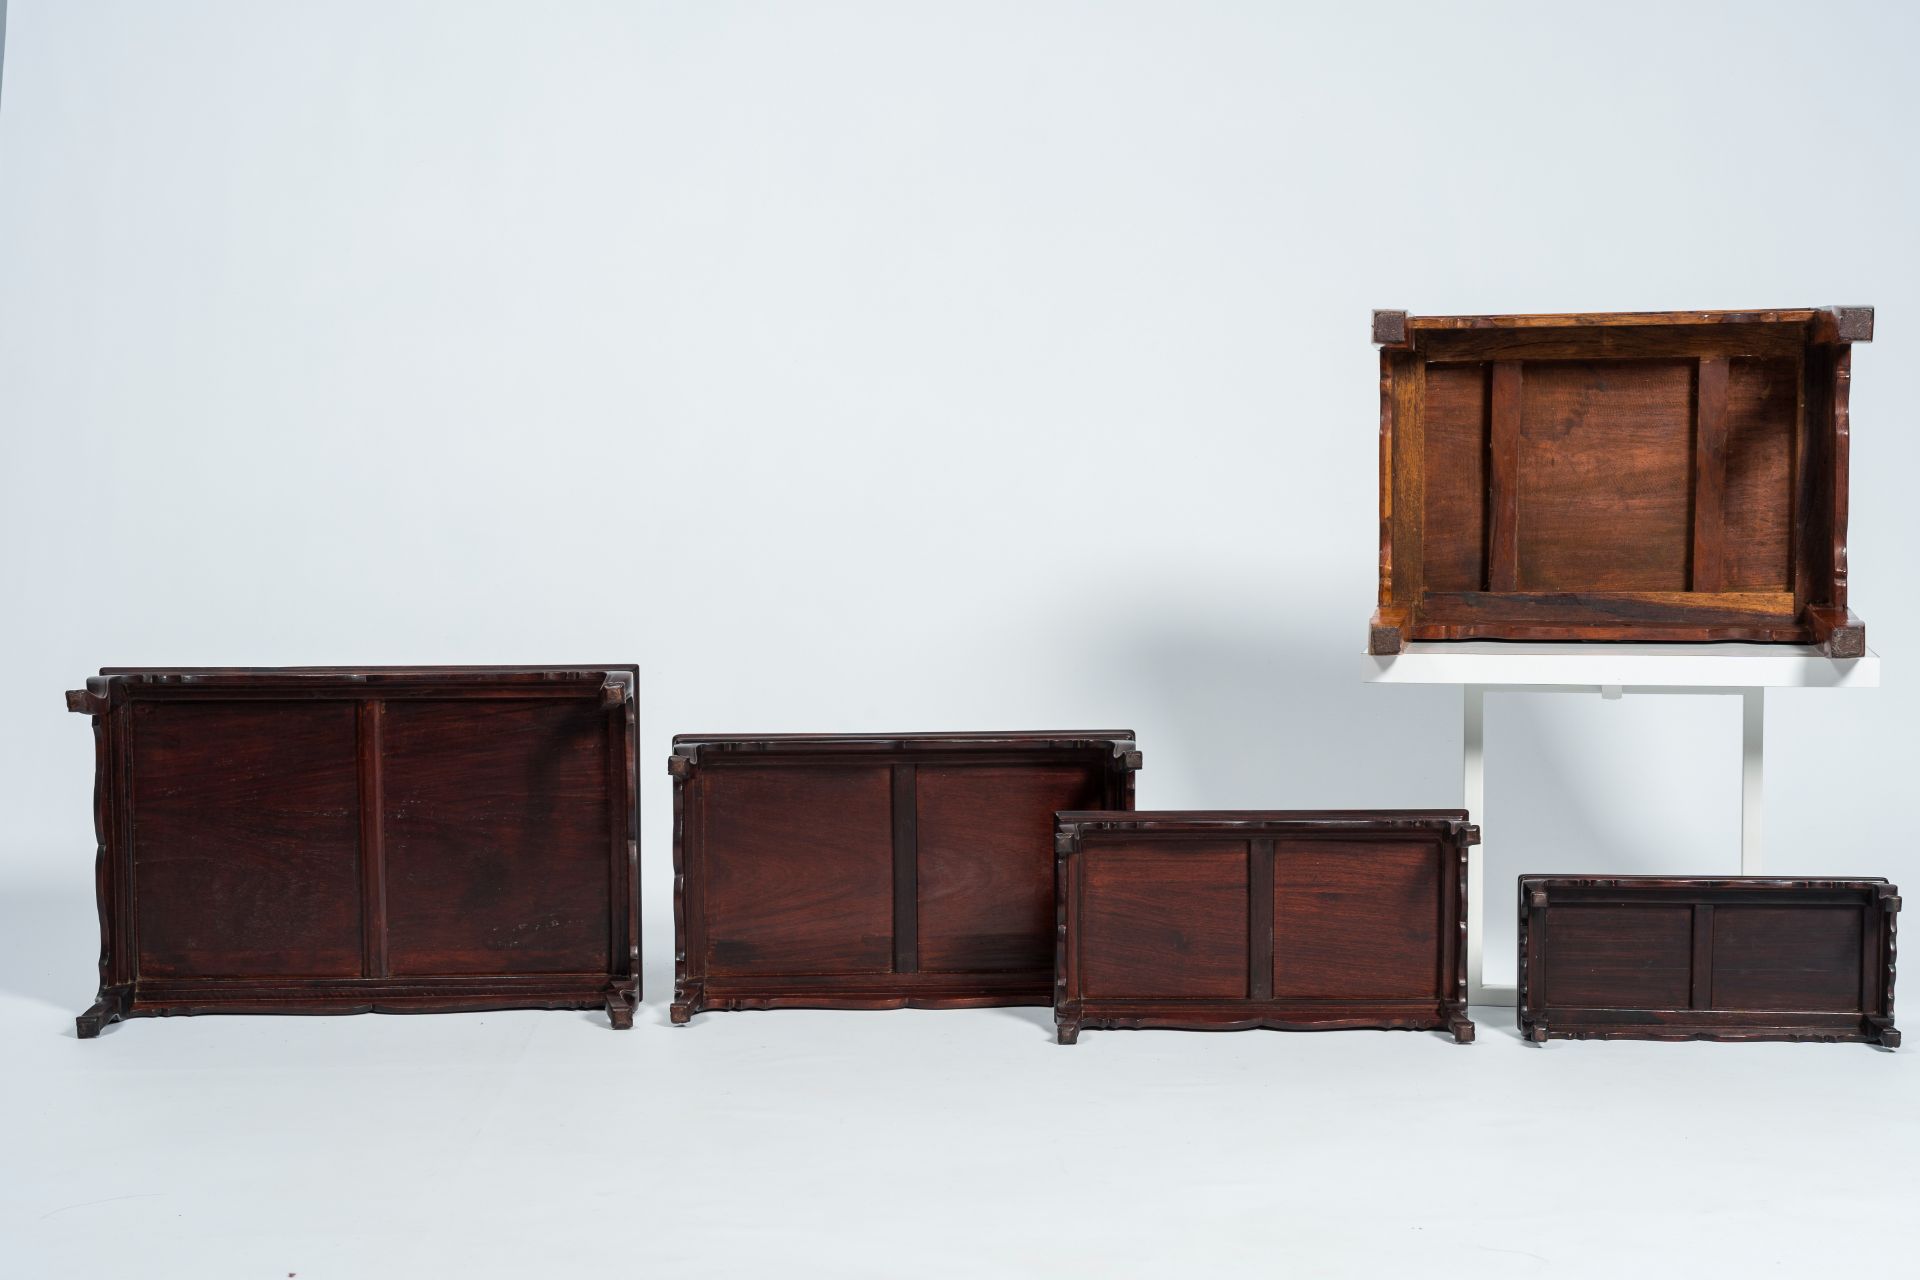 Four Chinese rectangular wood nesting tables and a side table with floral design, 20th C. - Image 8 of 8